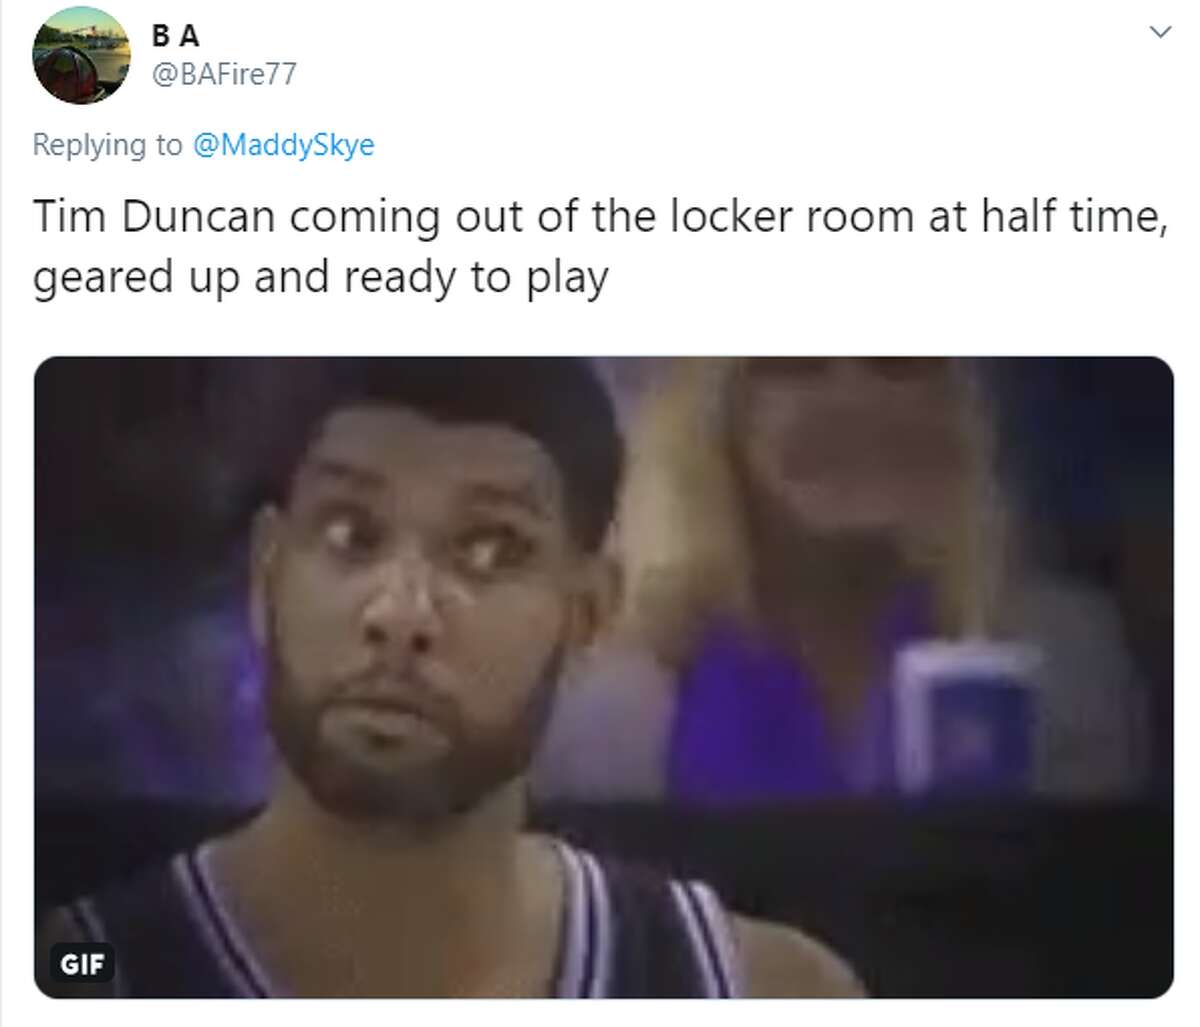 @BAFire77: Tim Duncan coming out of the locker room at half time, geared up and ready to play